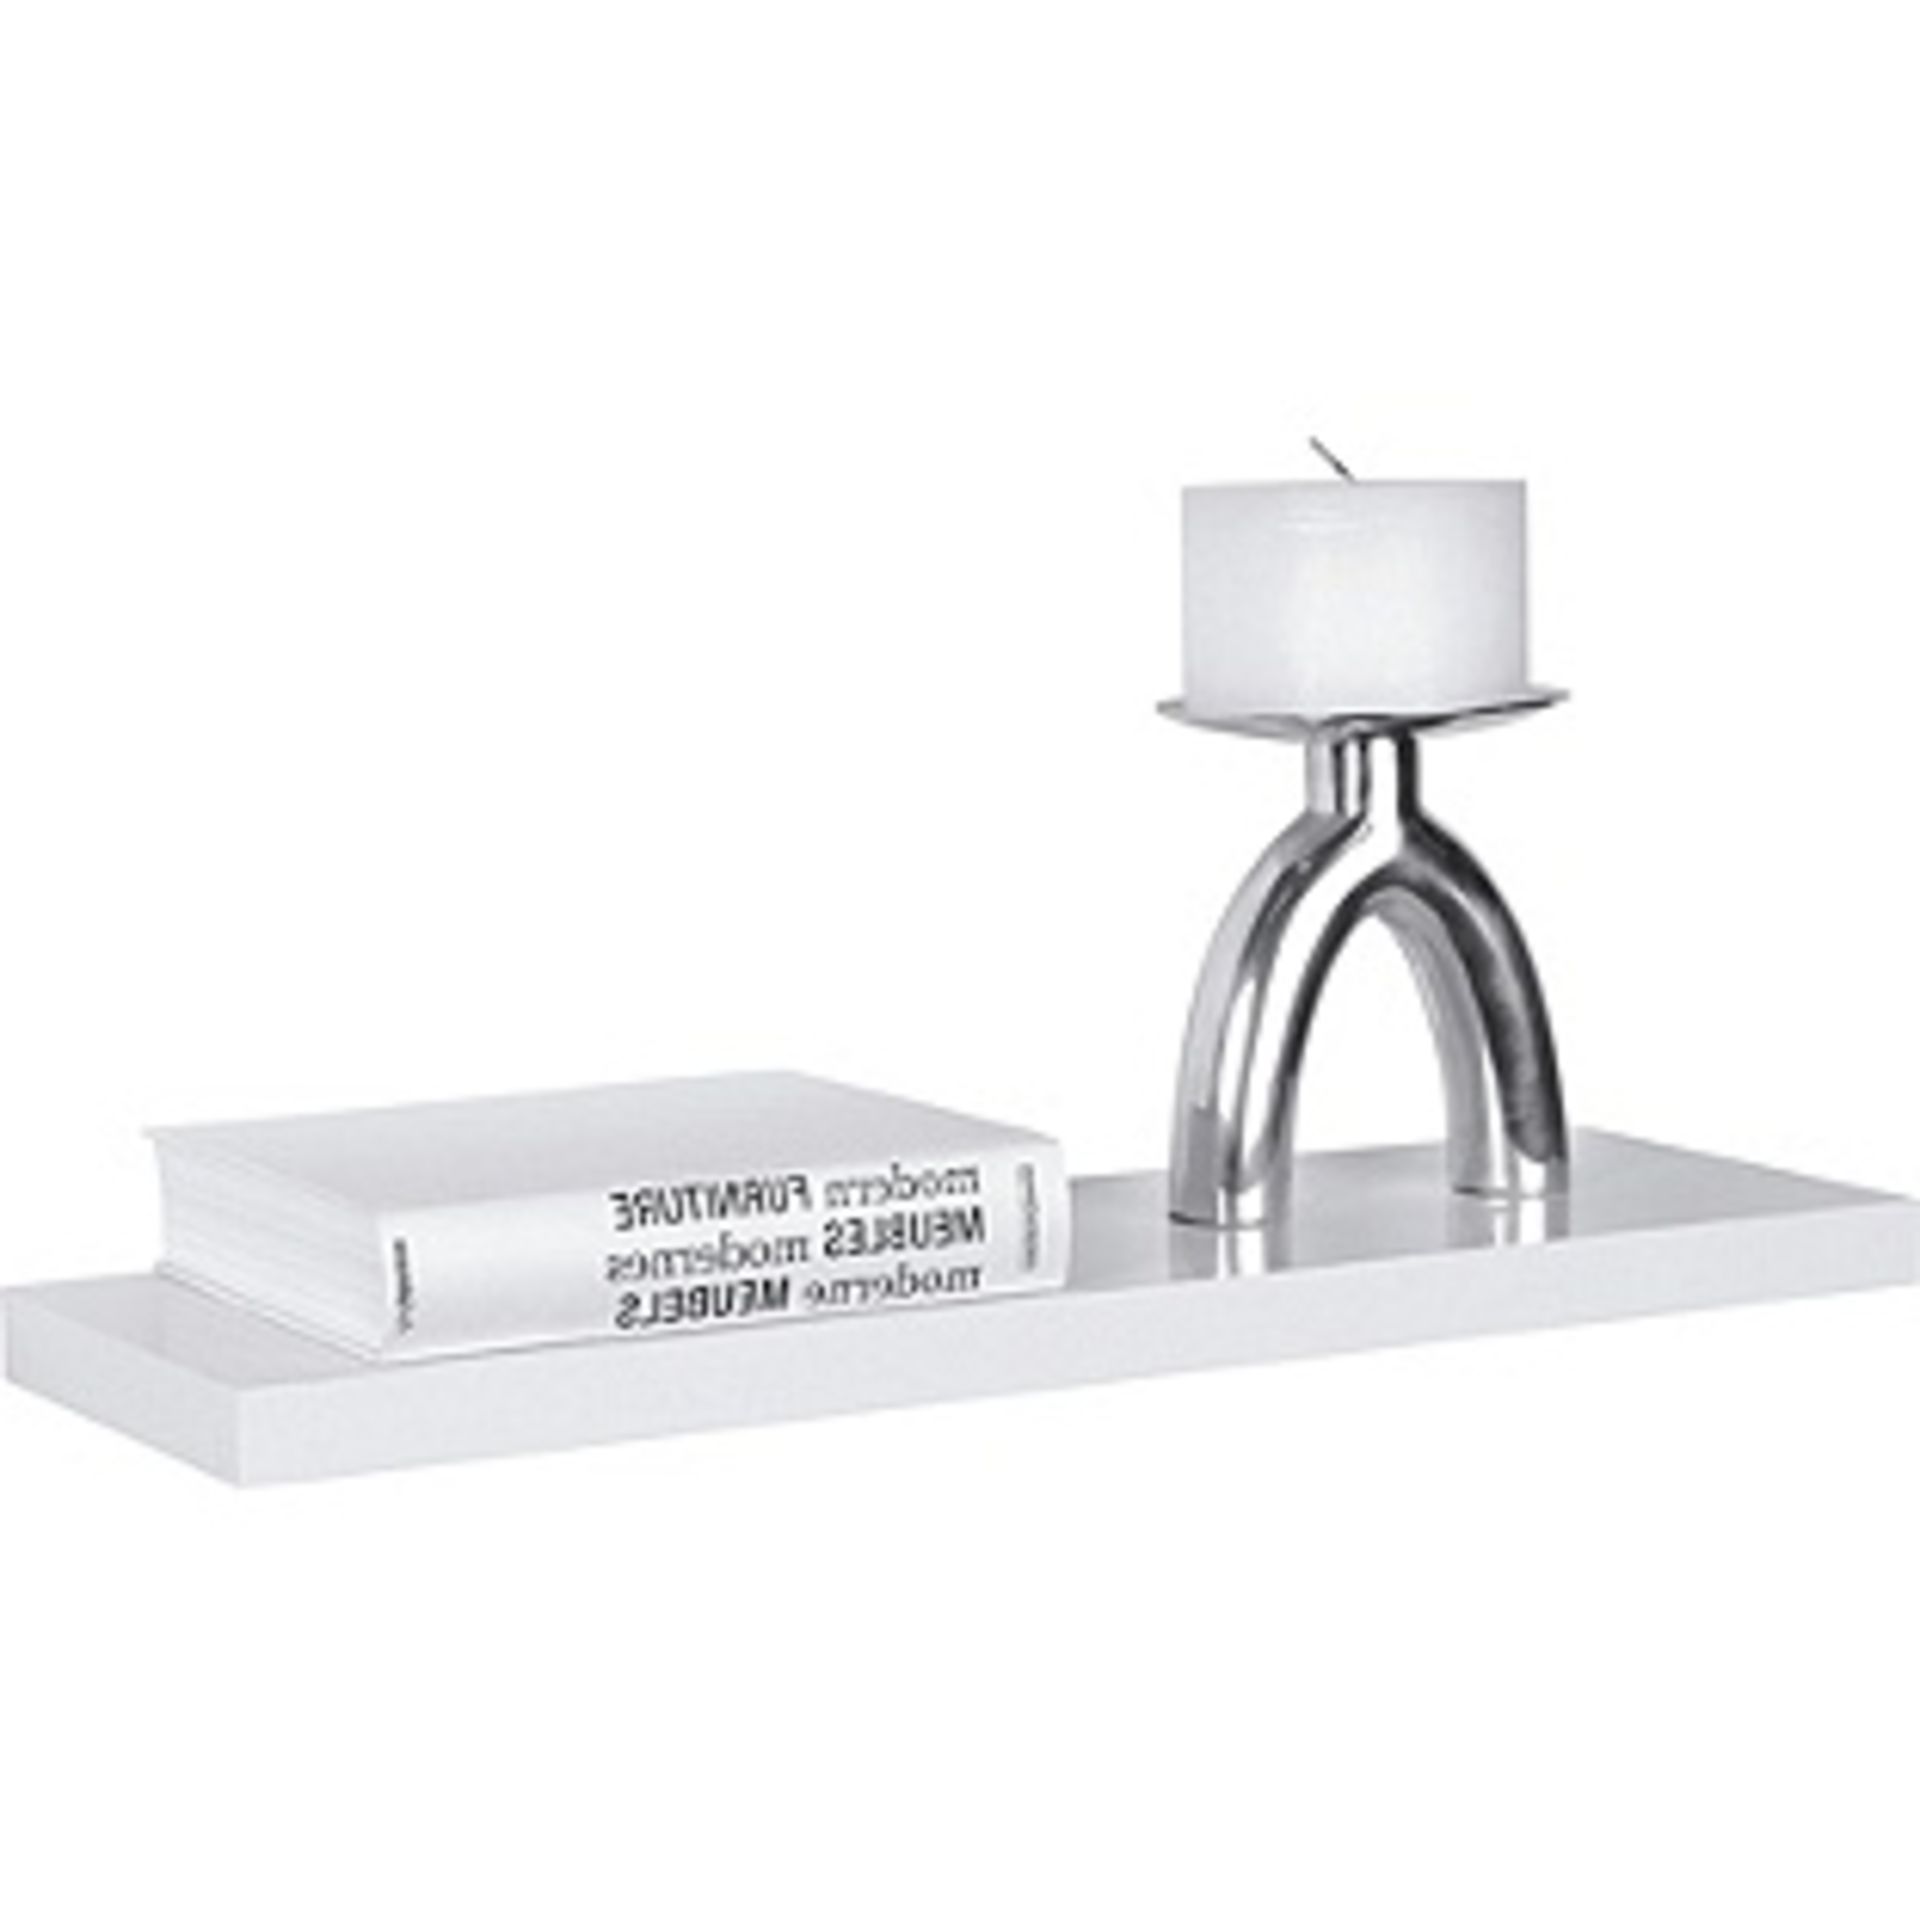 Collection High Gloss 60cm Floating Shelf - White. Size H3.8, W60, D25cm. Boxed & Unchecked Please